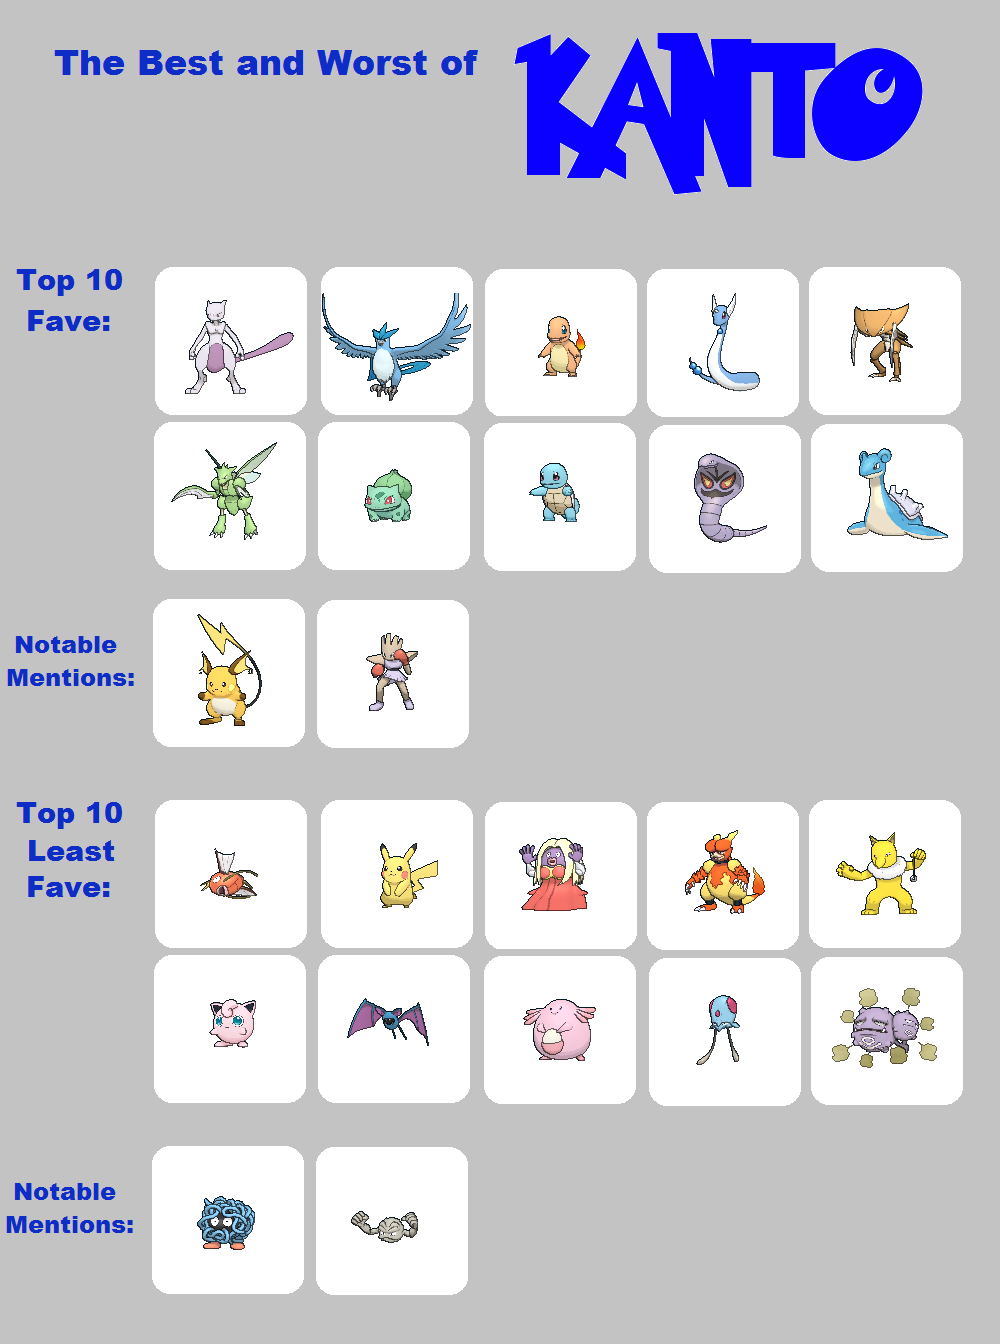 Top 3 least popular Pokemon from Kanto